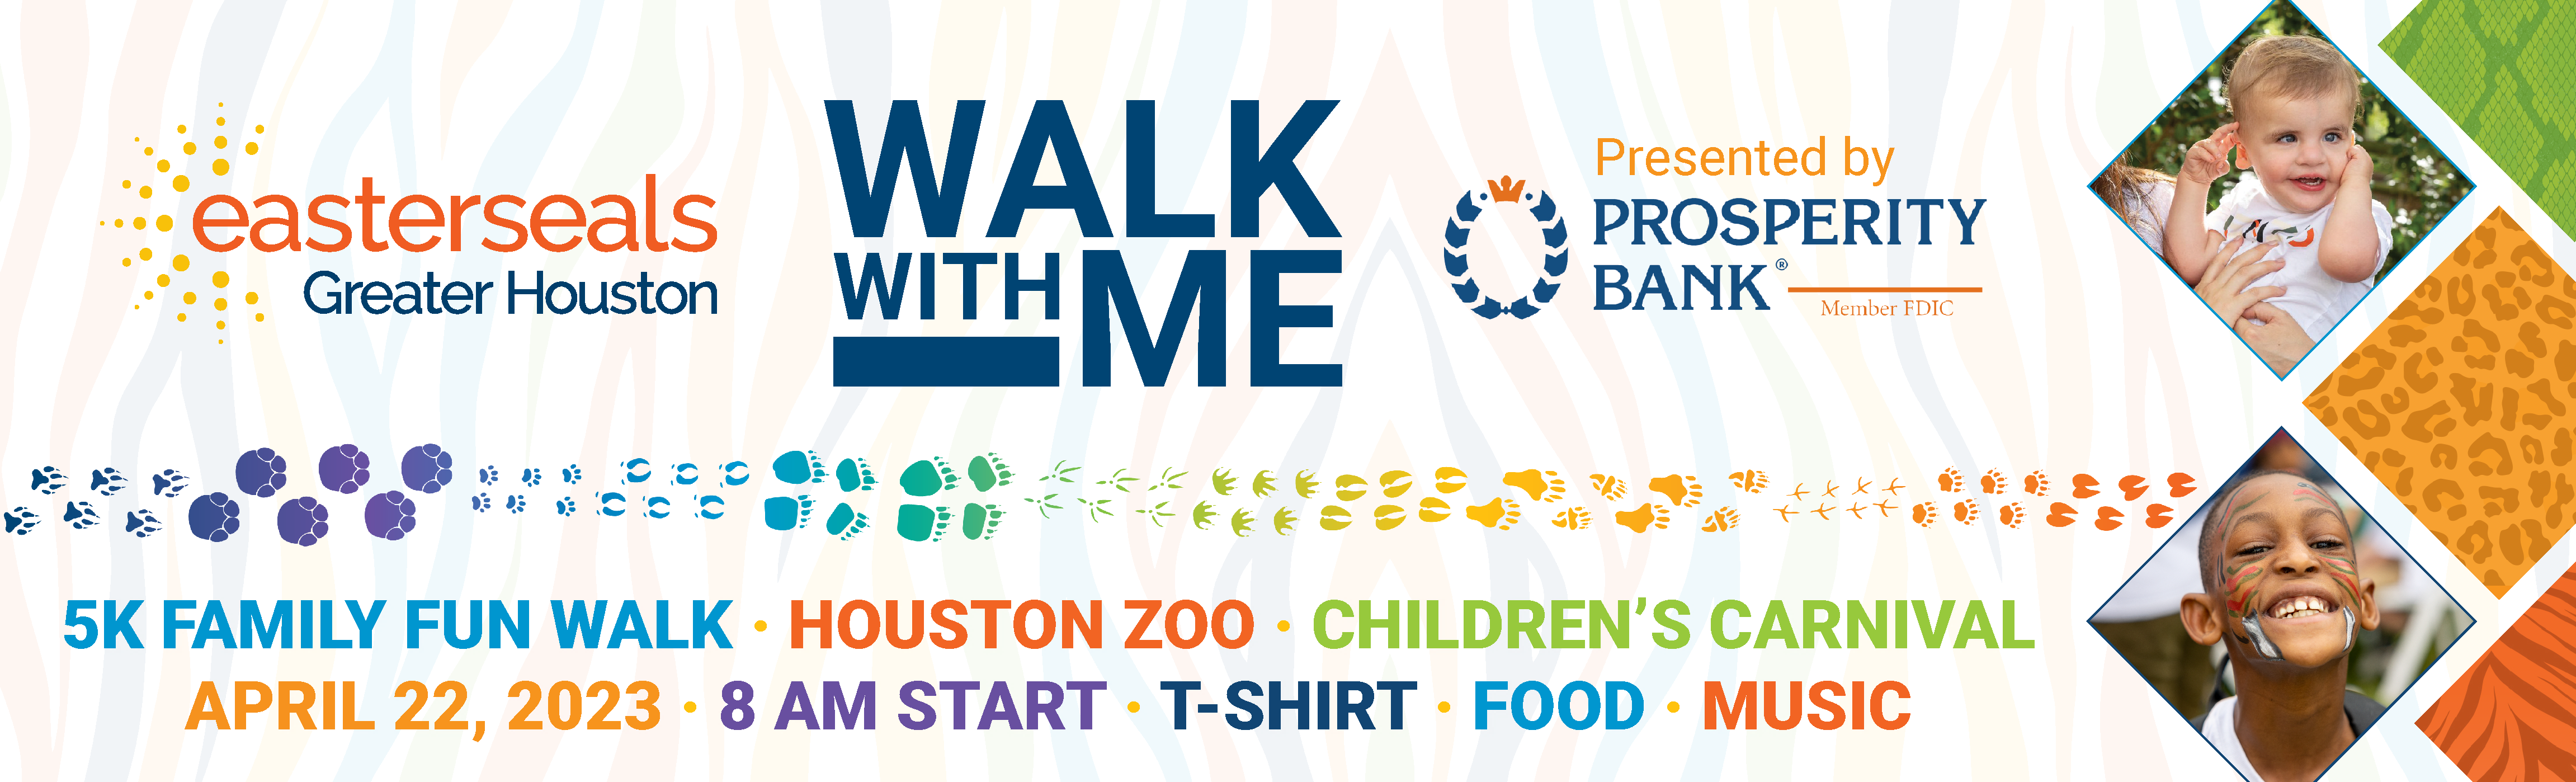 Register or donate at WalkWithMeHouston.org today!